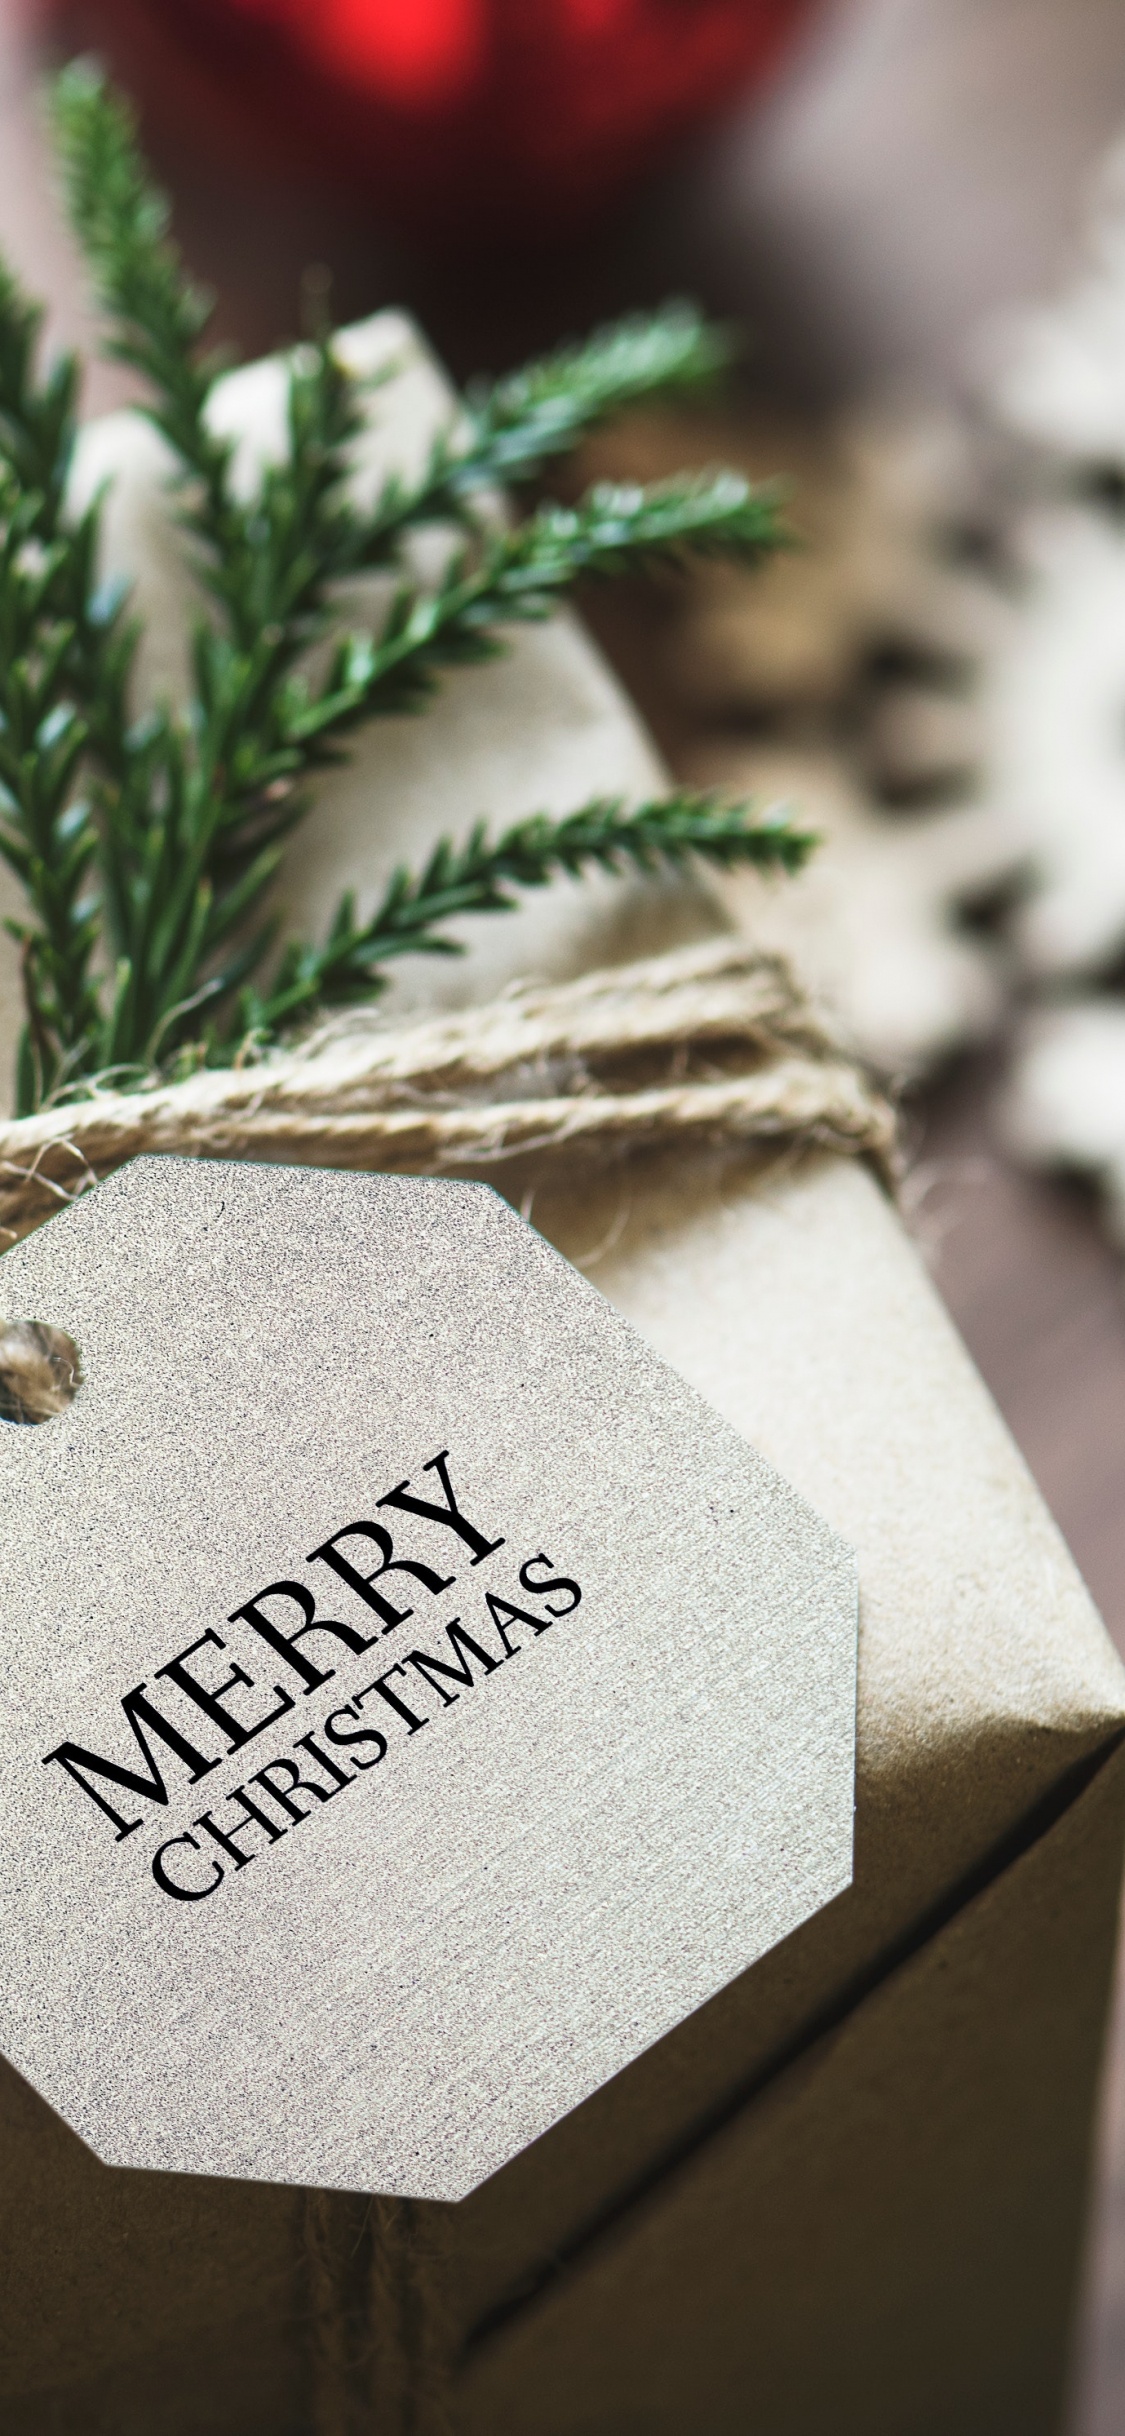 Christmas Day, Christmas Gift, Gift, Christmas Card, Gift Wrapping. Wallpaper in 1125x2436 Resolution